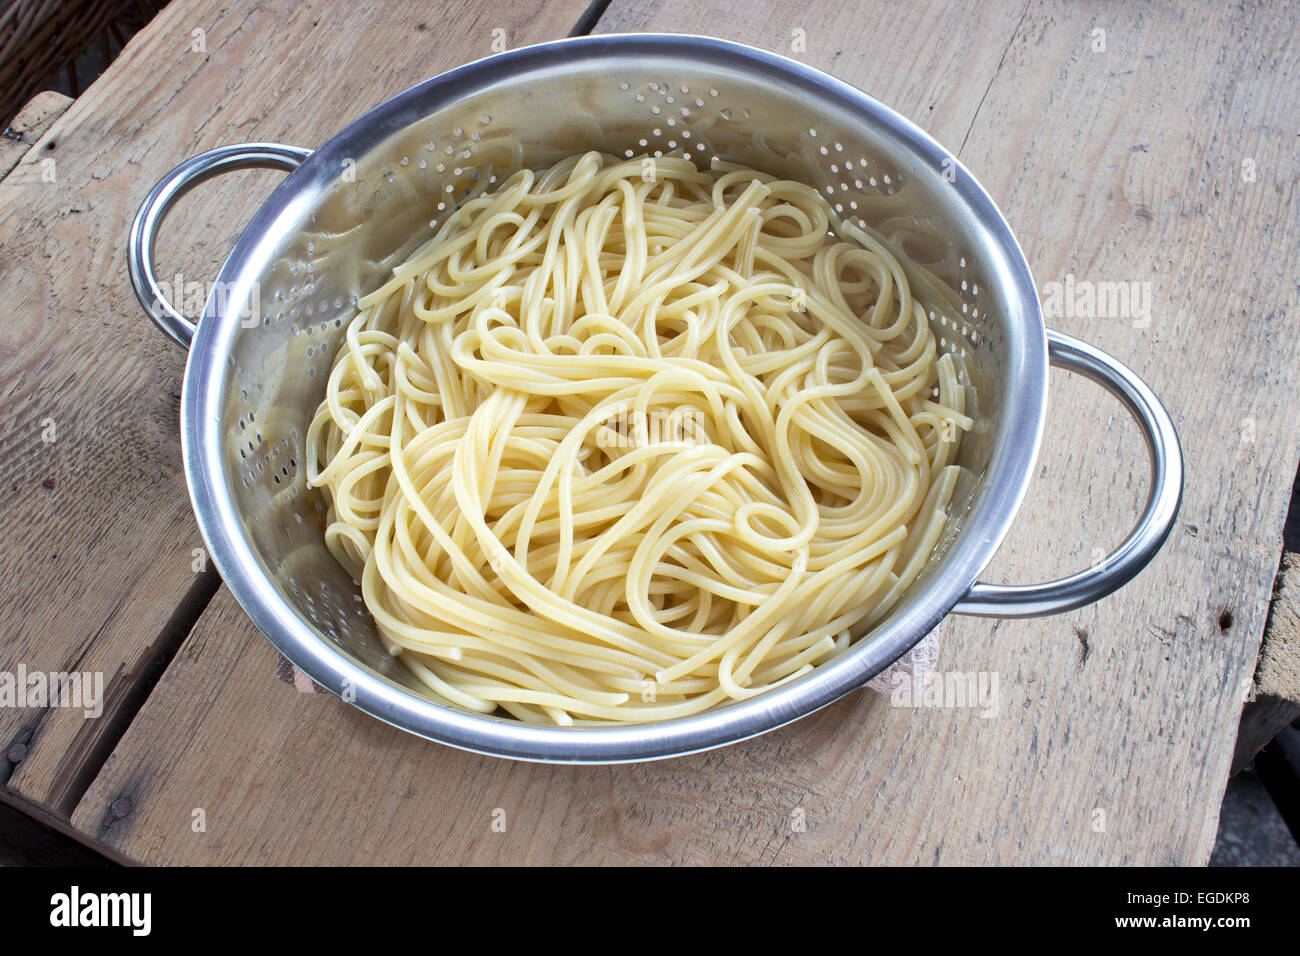 Fresh cooked spaghetti in strainer on wooden table Stock Photo